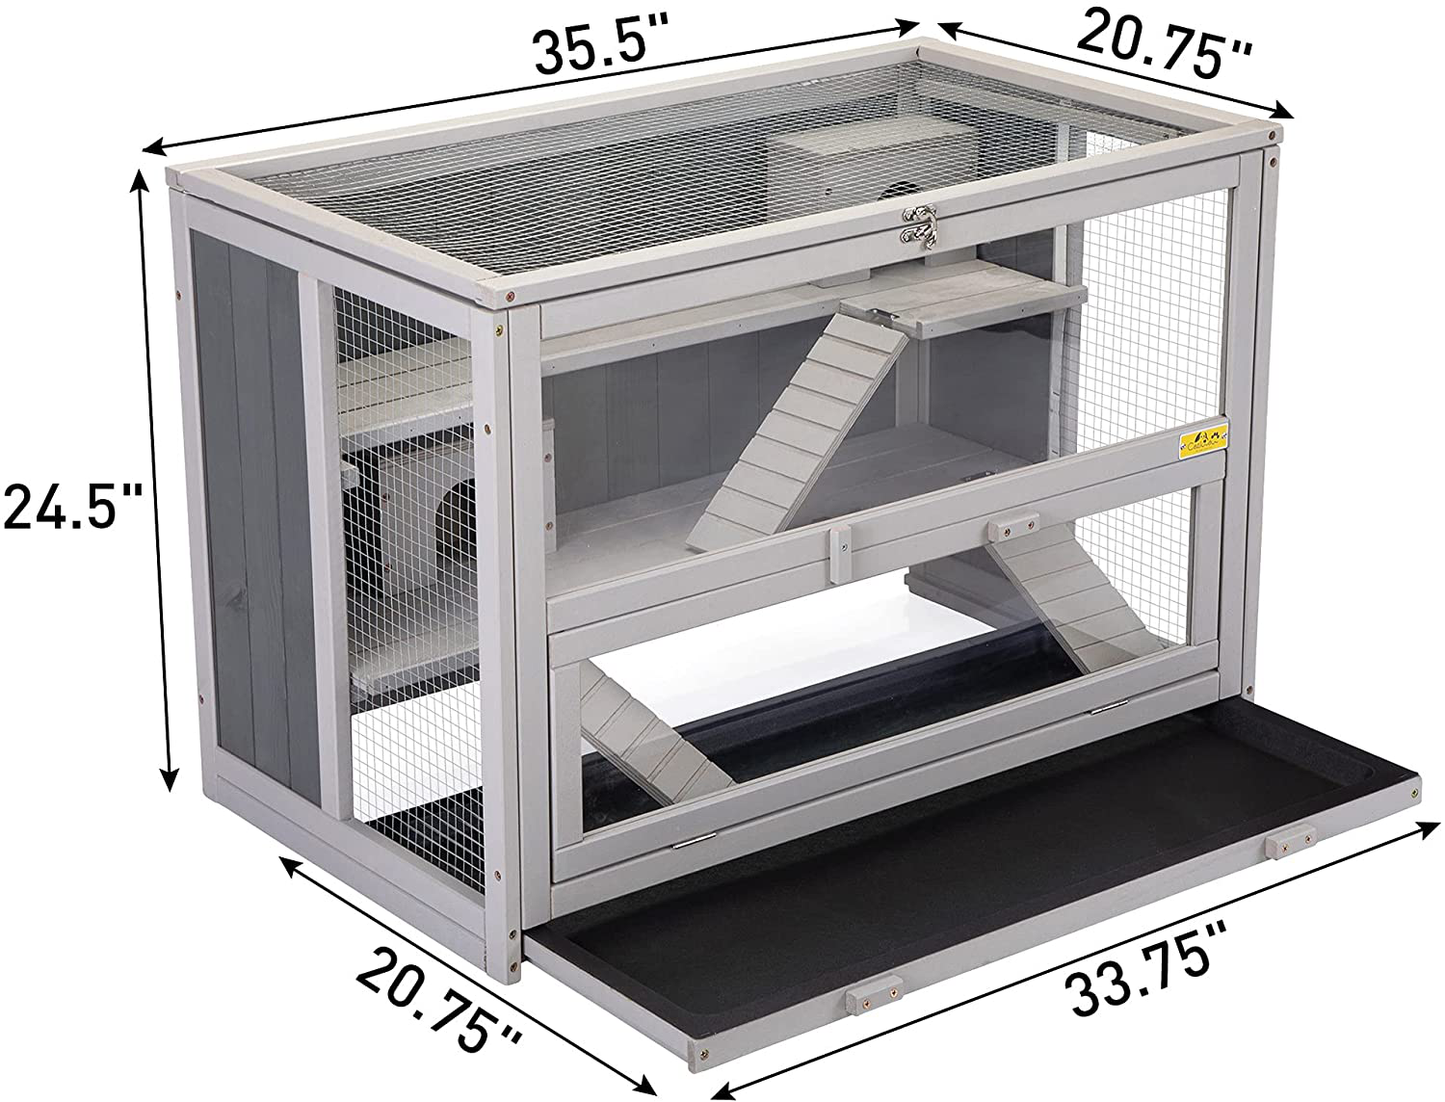 COZIWOW 3 Tier Hamster Cage, Wood Guinea Pig Habitat, Rat House with Hideouts, Ramps and Pull Out Tray, Small Animal House Chinchilla Enclosure, Grey